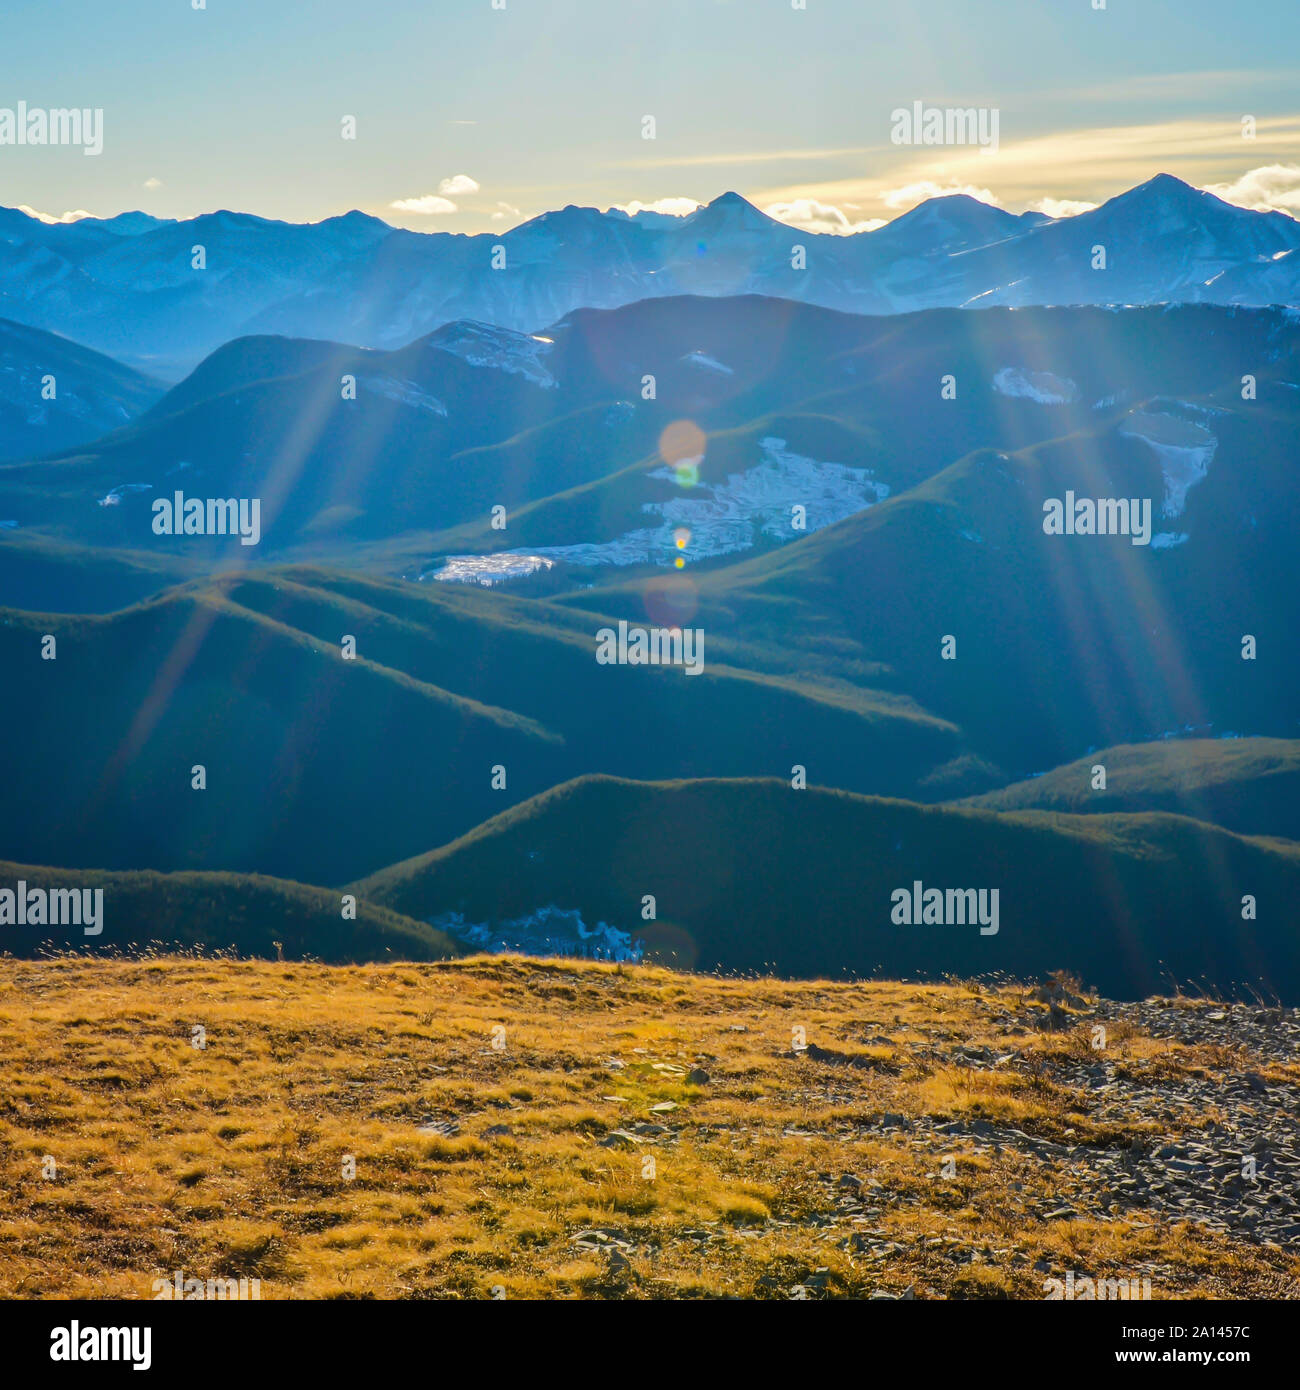 Landscape with lens flare of Kananaskis Mountains and Foothills from Prairie Mountain near Bragg Creek, and Calgary, Alberta, Canada Stock Photo